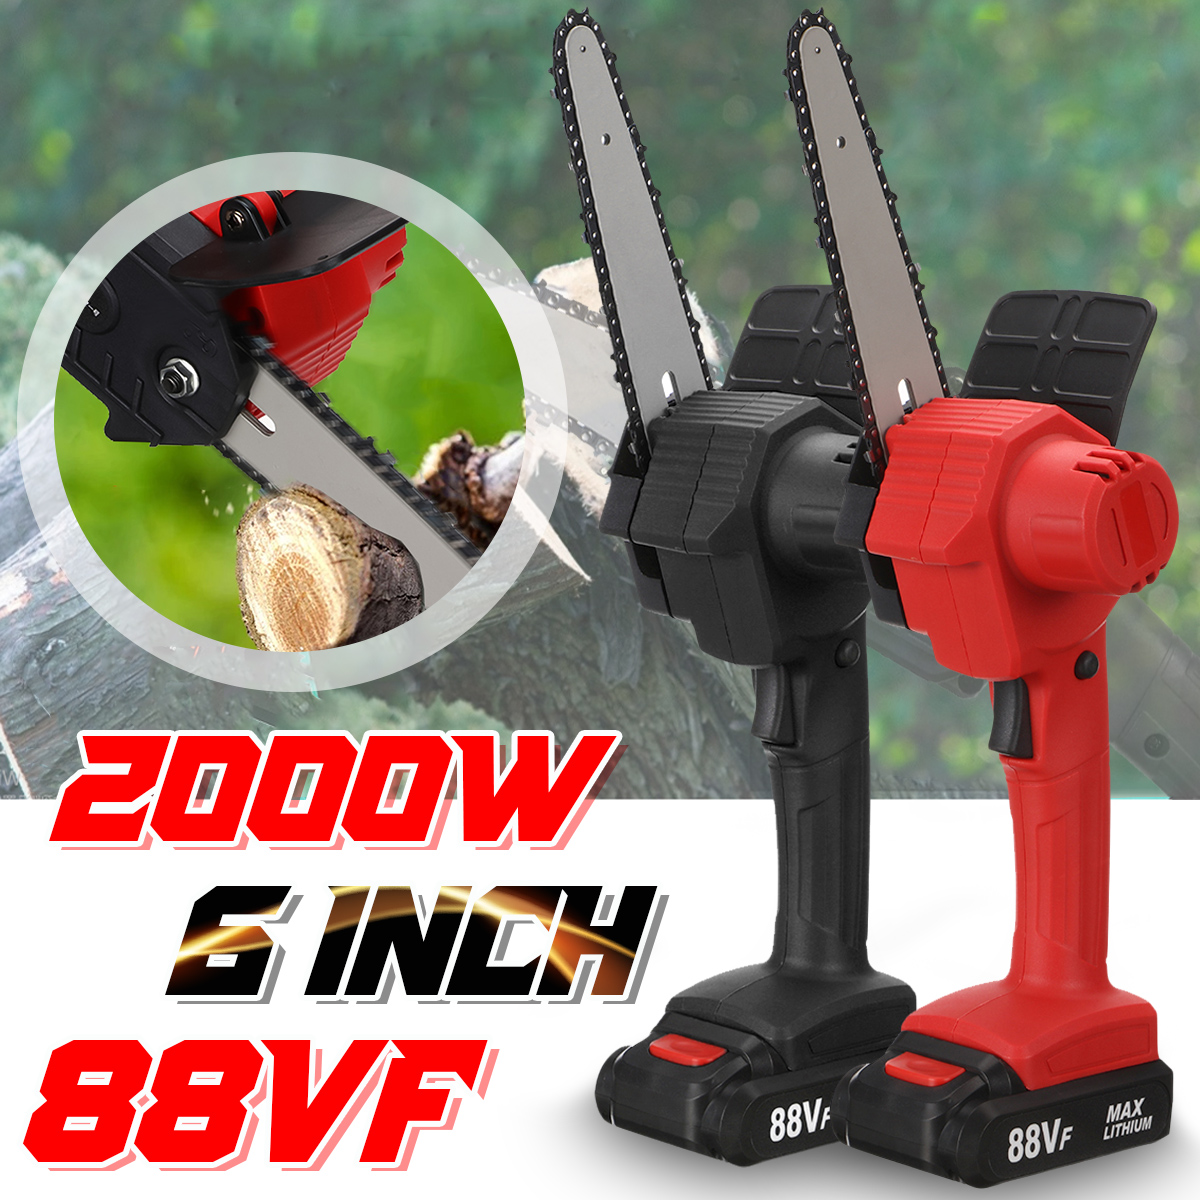 88VF-6Inch-Electric-Chain-Saw-Woodworking-Wood-Cutter-One-Hand-Saw-W-12-Battery-1879554-1